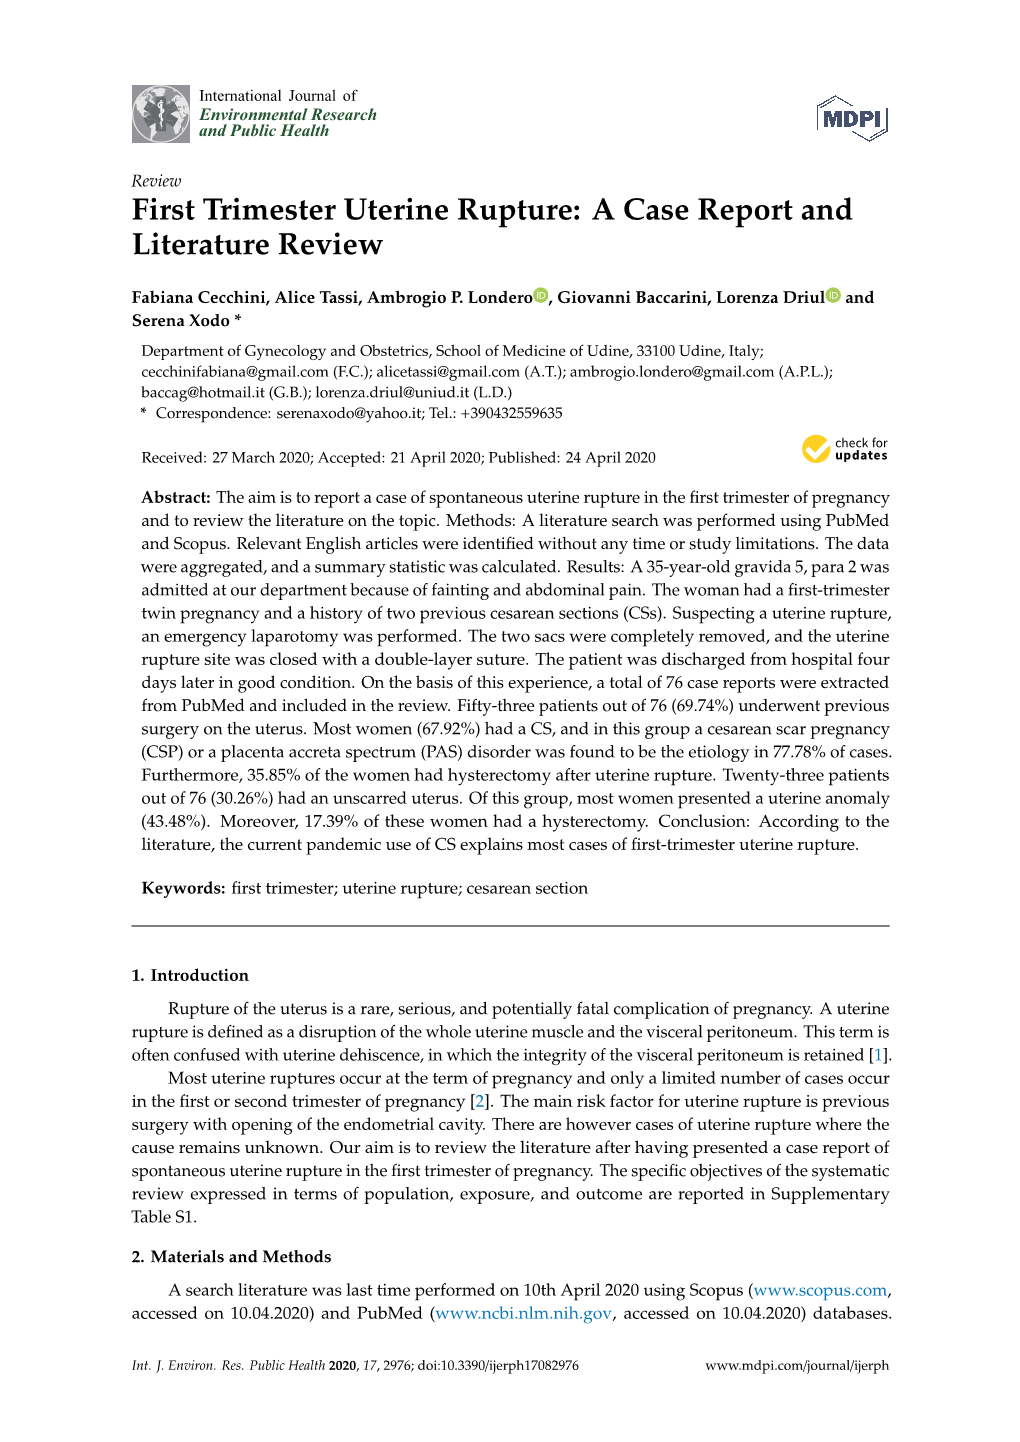 First Trimester Uterine Rupture: a Case Report and Literature Review